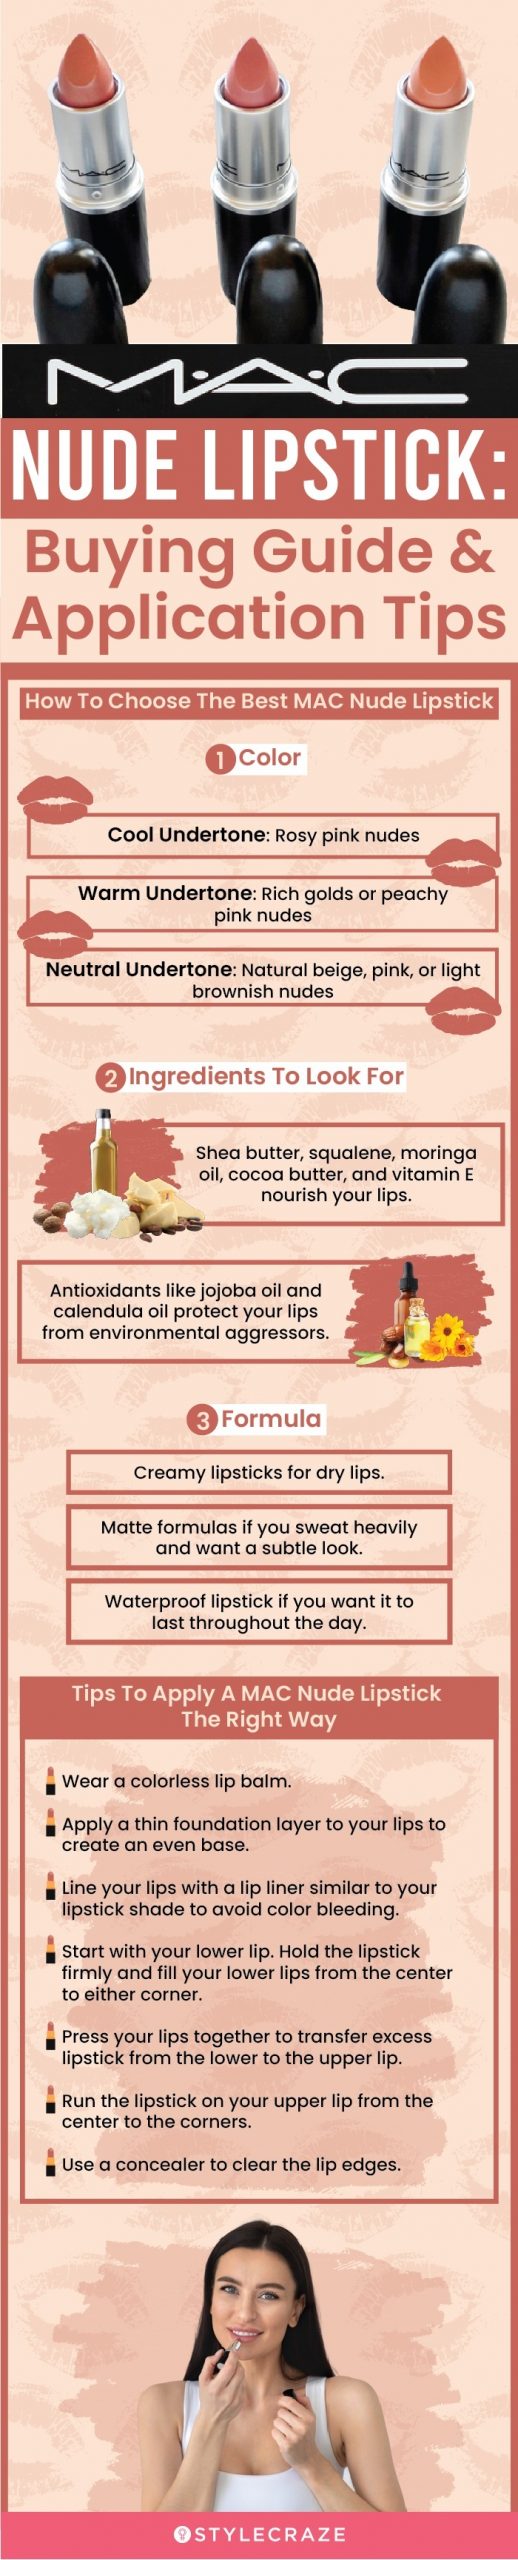 MAC Nude Lipstick: Buying Guide & Application Tips [infographic]